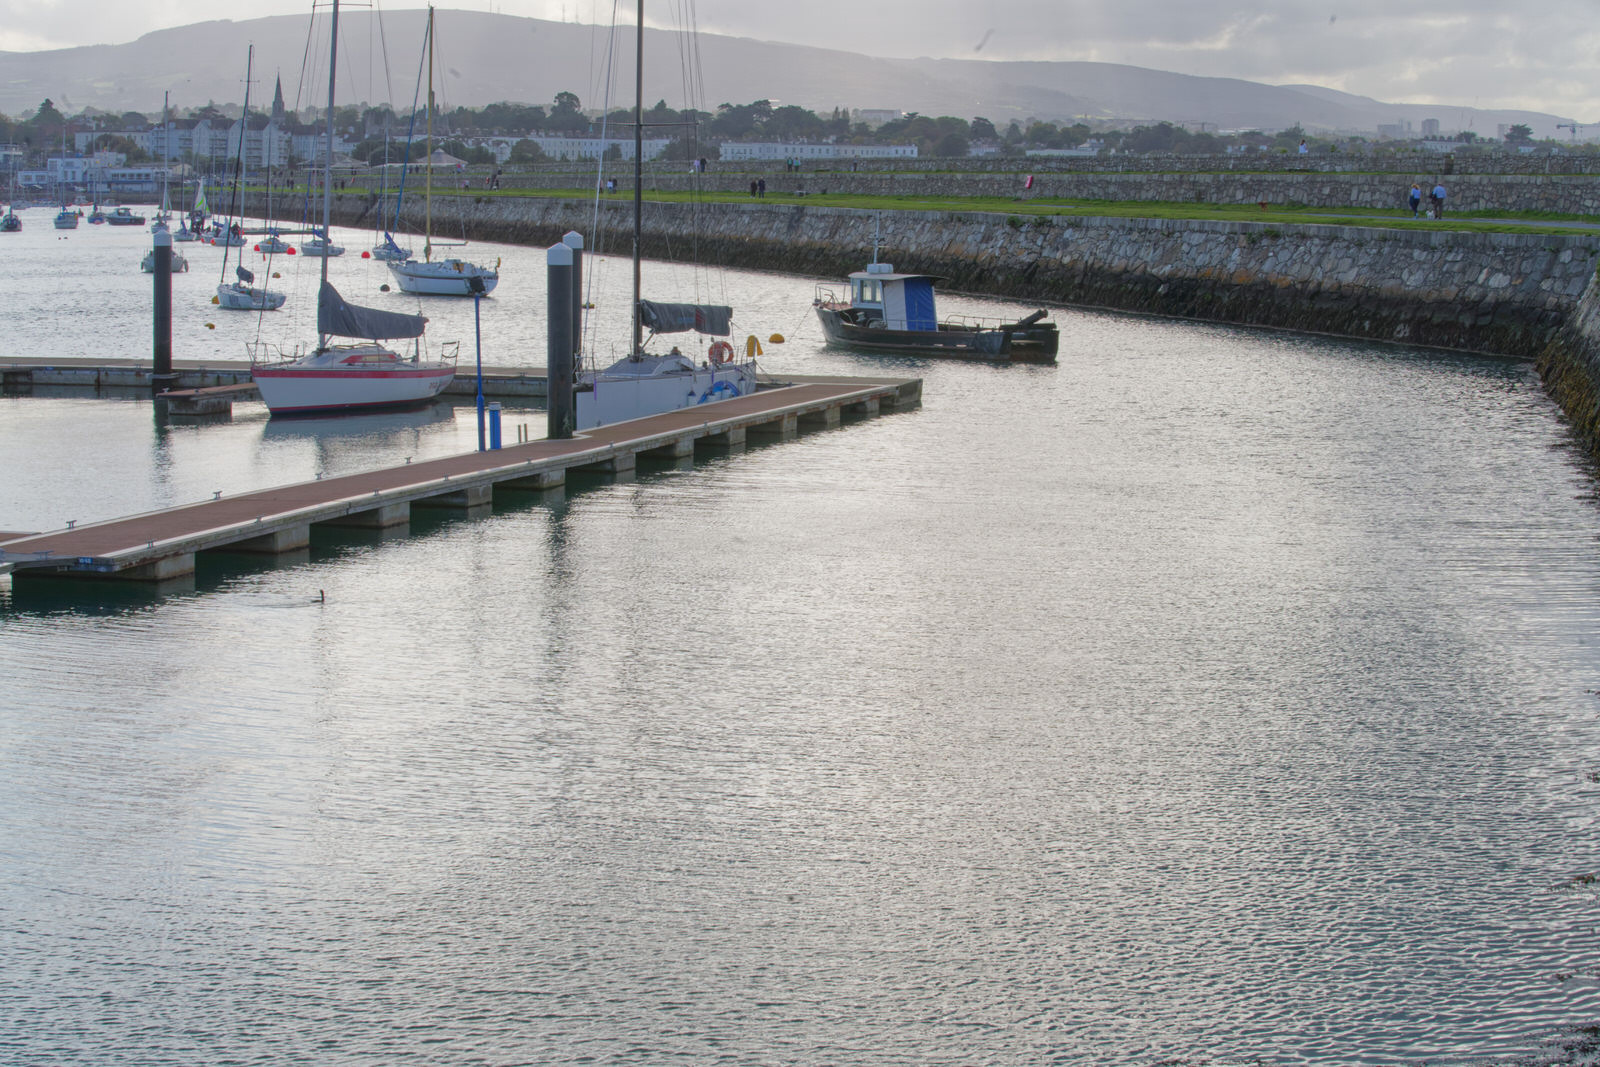 THE SECTION OF THE MARINA NEAR THE WESTERN BREAKWATER [DUN LAOGHAIRE HARBOUR]
 013